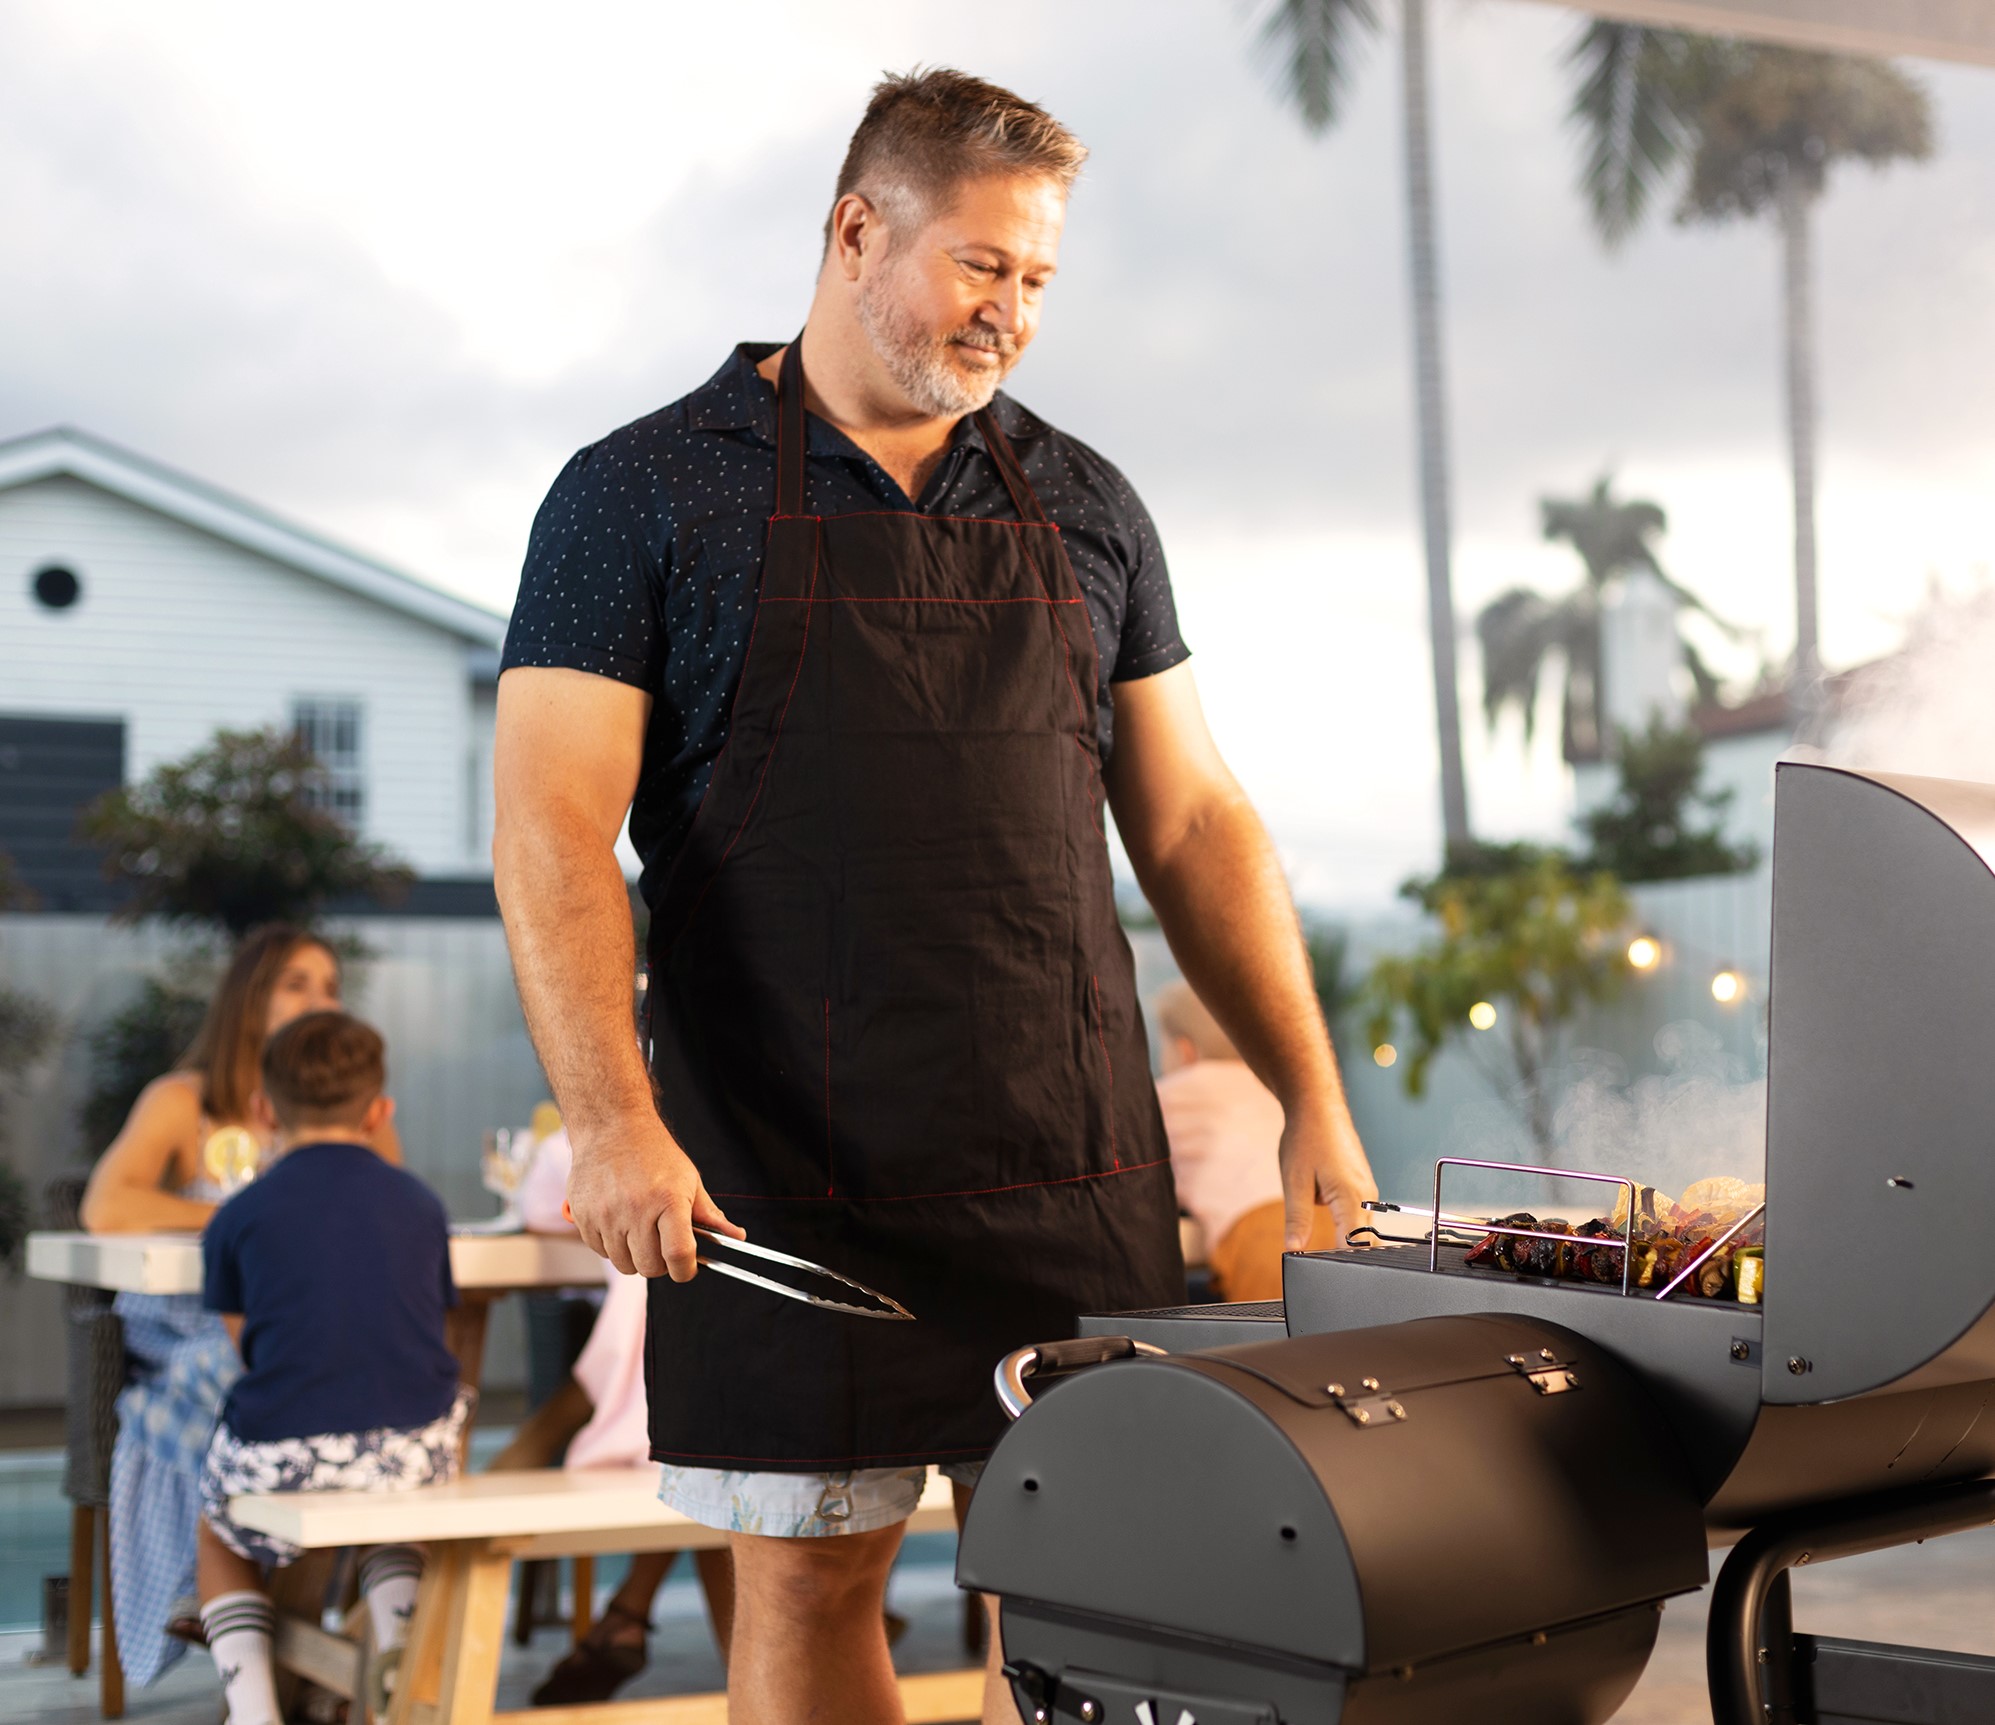 Man in black shirt grilling on a BBQ with family members seated in the background